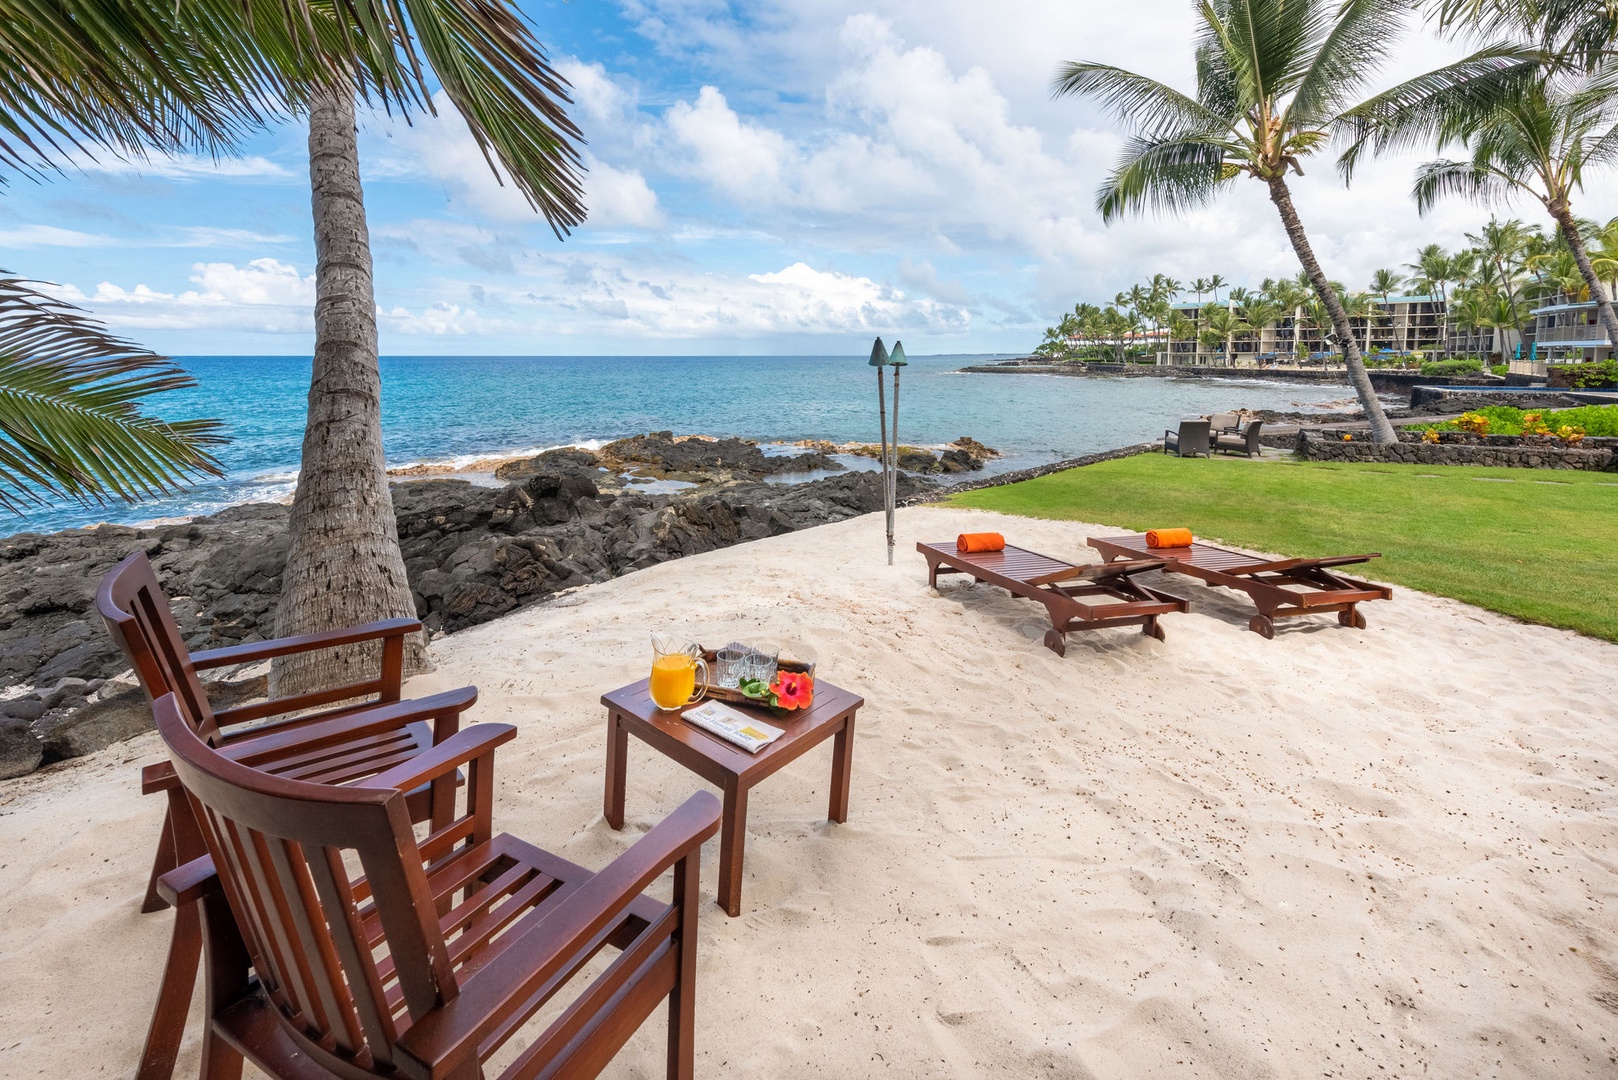 Kailua Kona Vacation Rentals, Kona Beach Bungalows** - Experience tranquility at Ocean Front Seating Area 2, where the waves become the soundtrack to your relaxation.